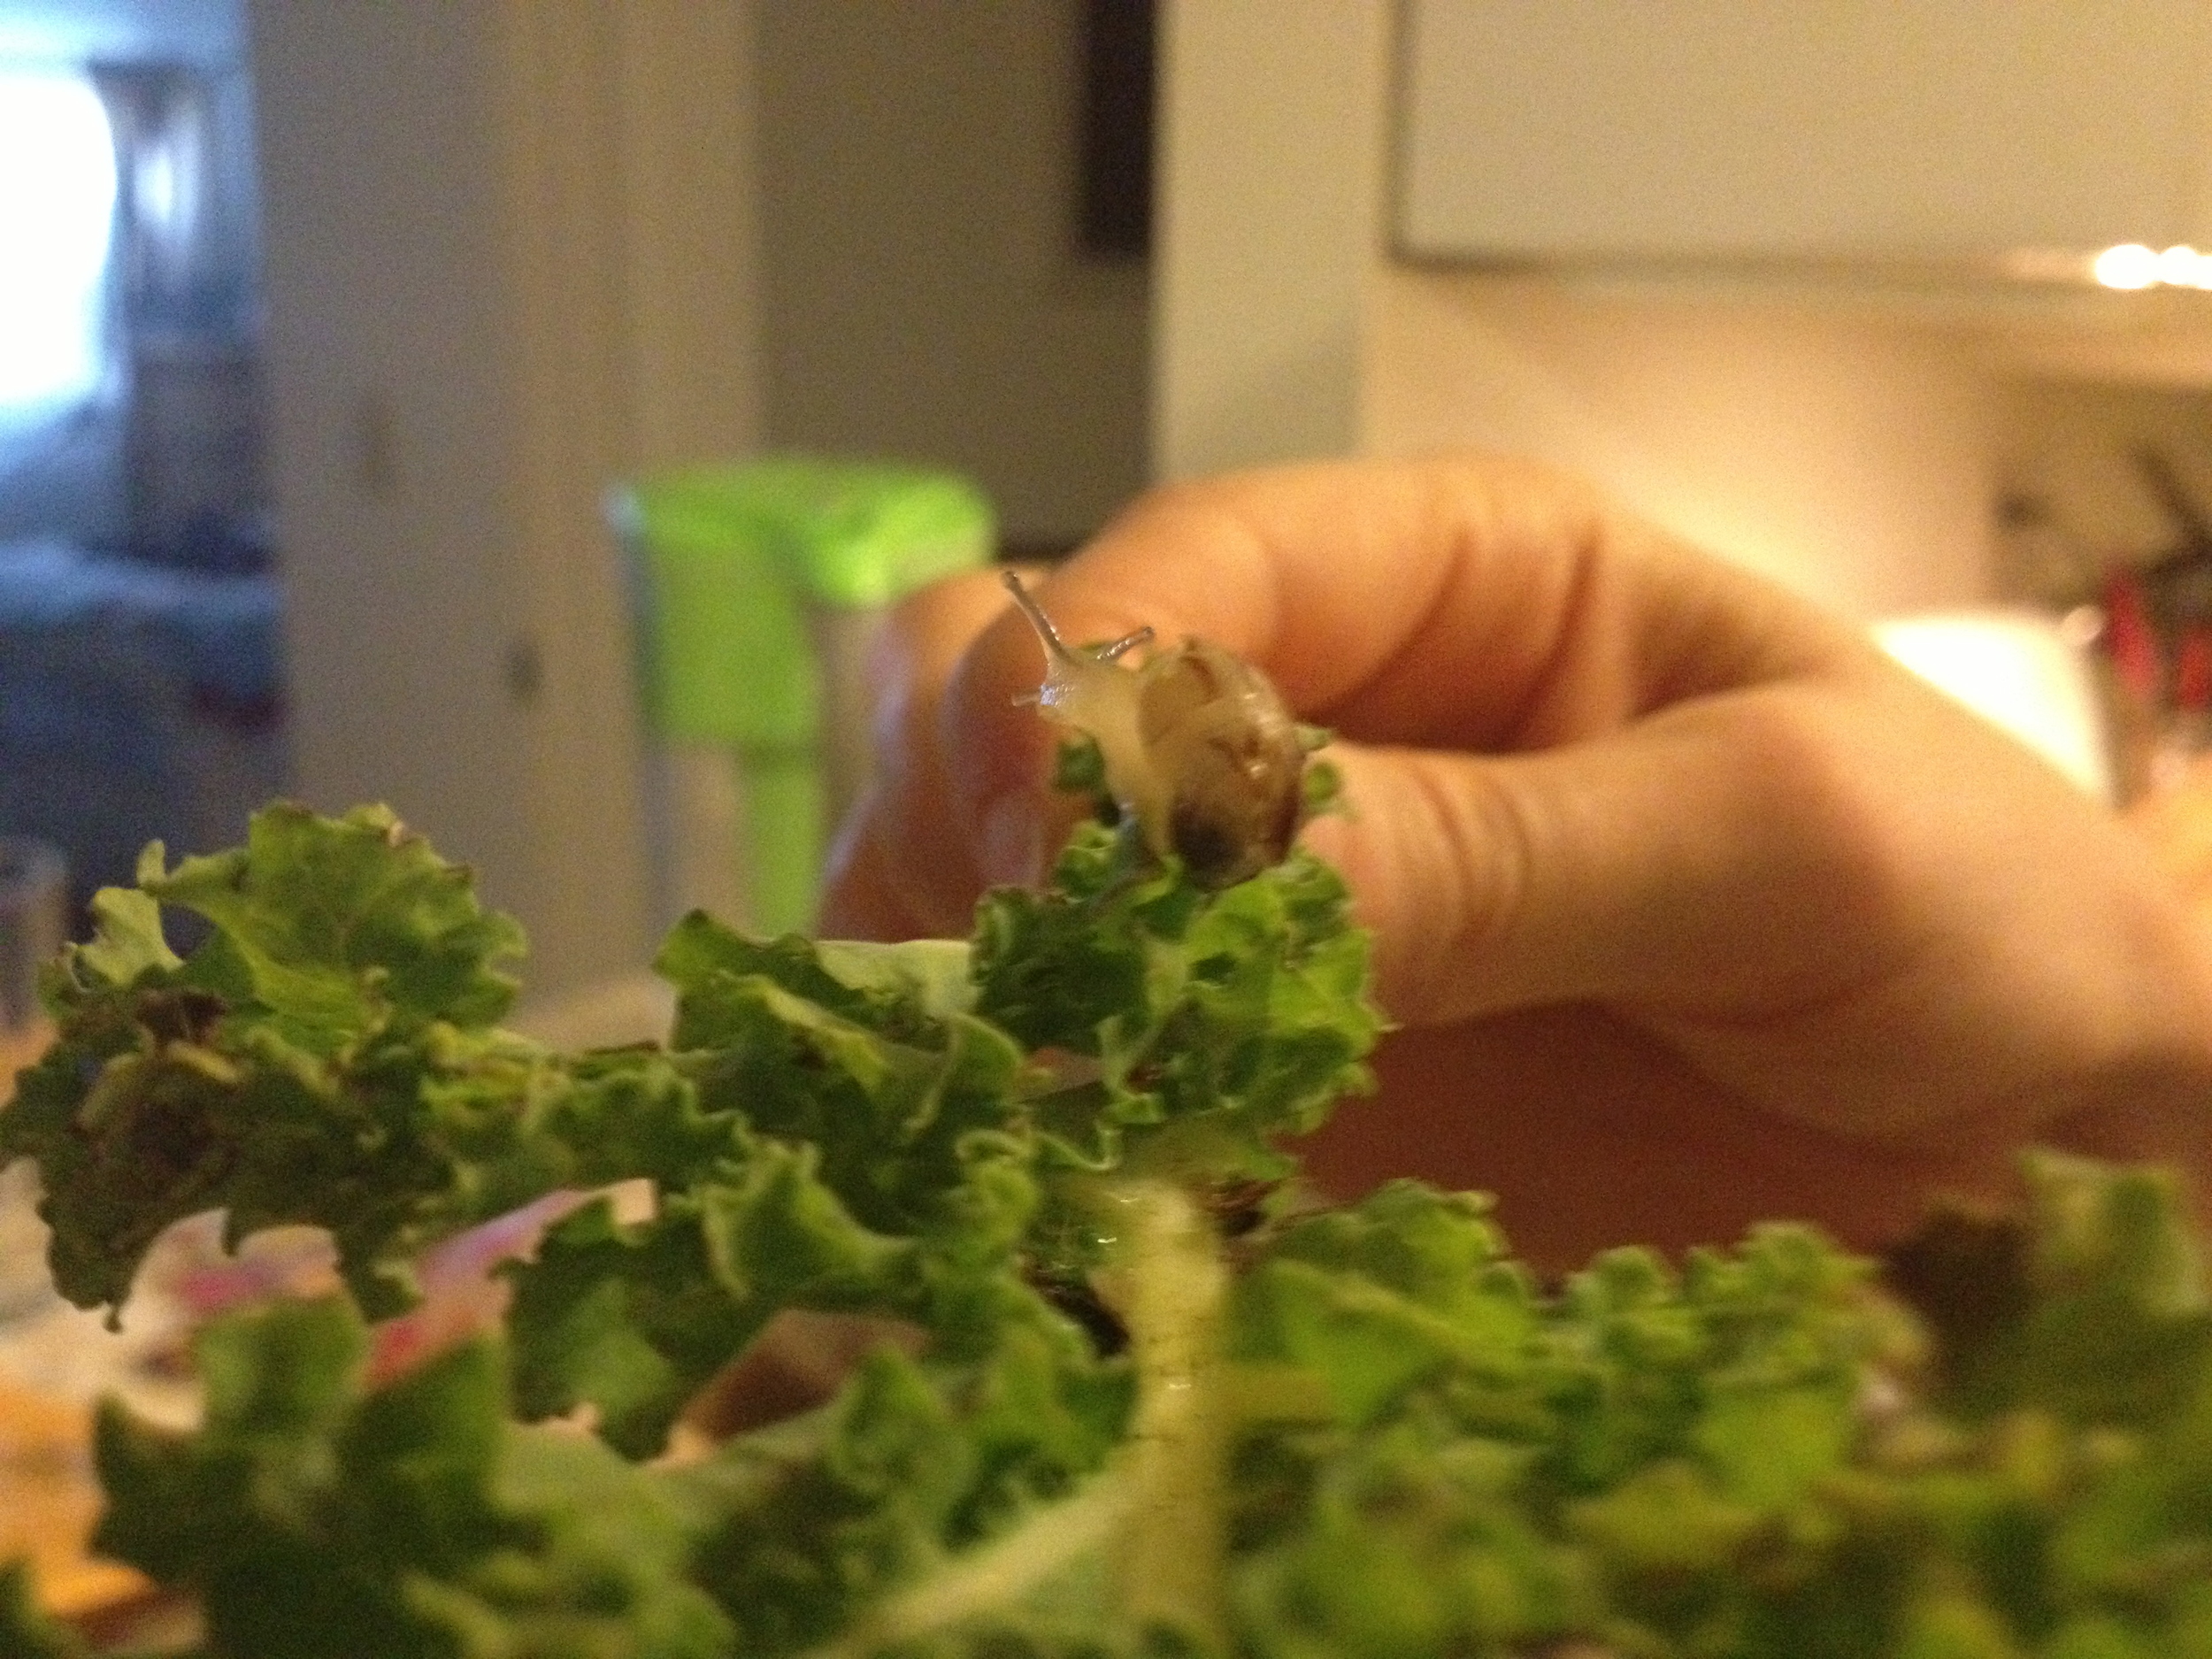 Kale in the kitchen, North Hollywood, CA